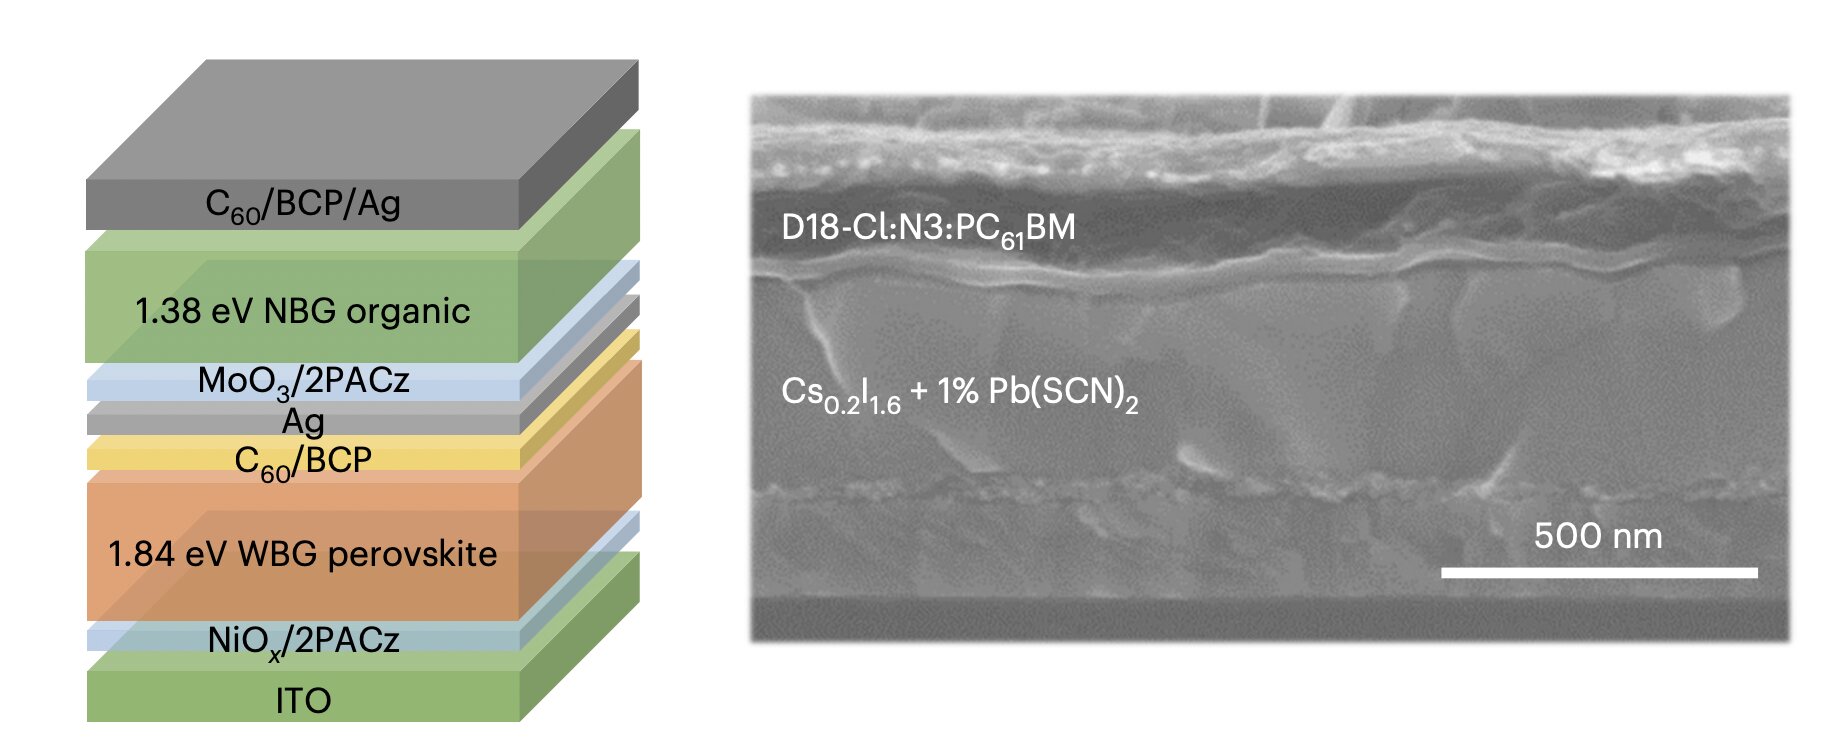 A strategy to boost the efficiency of perovskite/organic solar cells